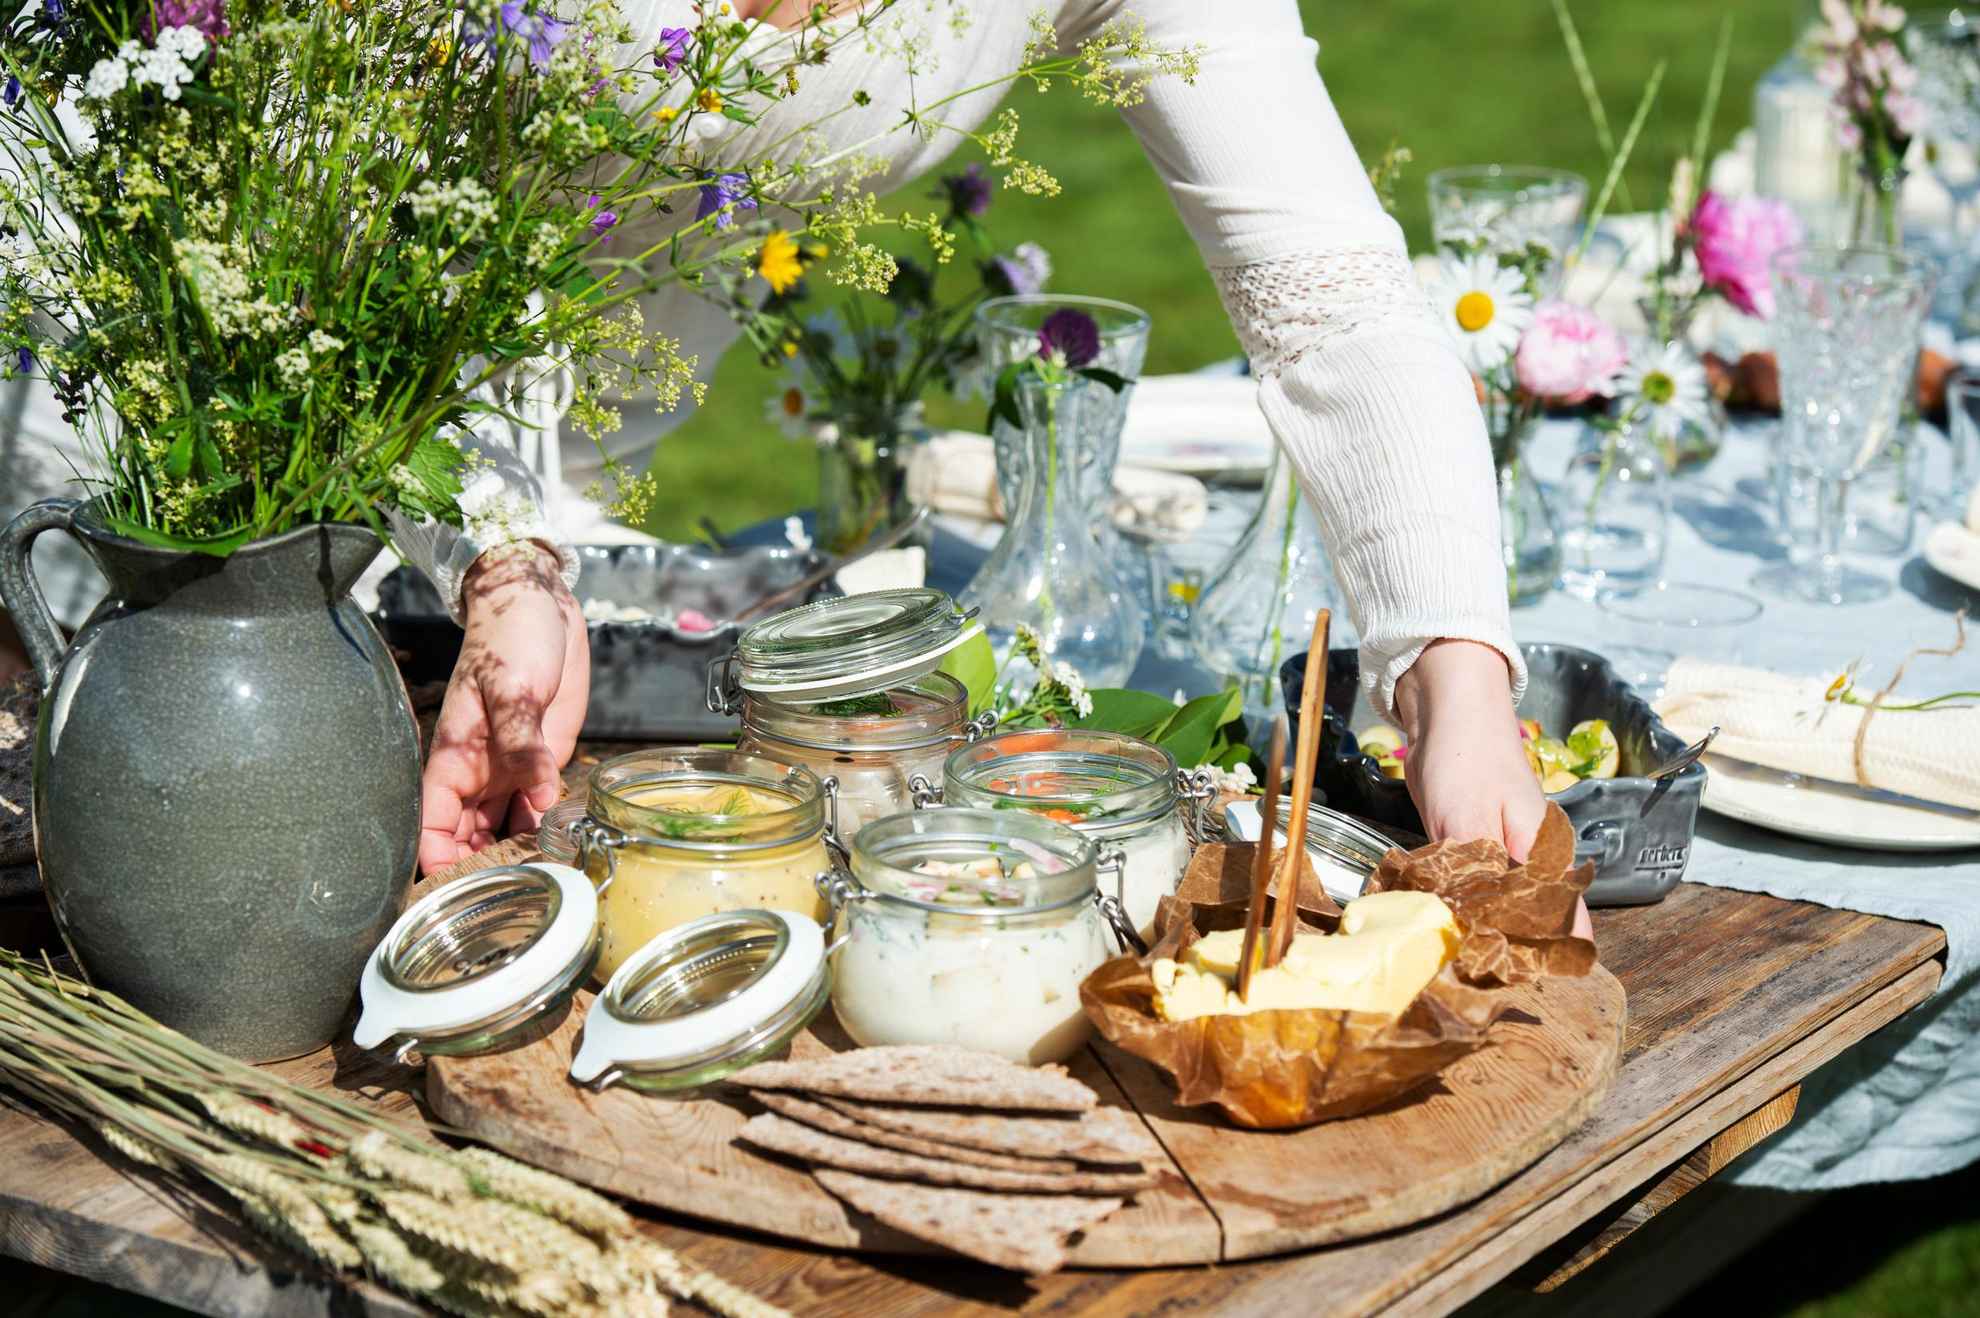 A woman puts a tray with pickled herring, butter and bread on a table set for midsummer lunch. Next to the tray is a vase with wild flowers.